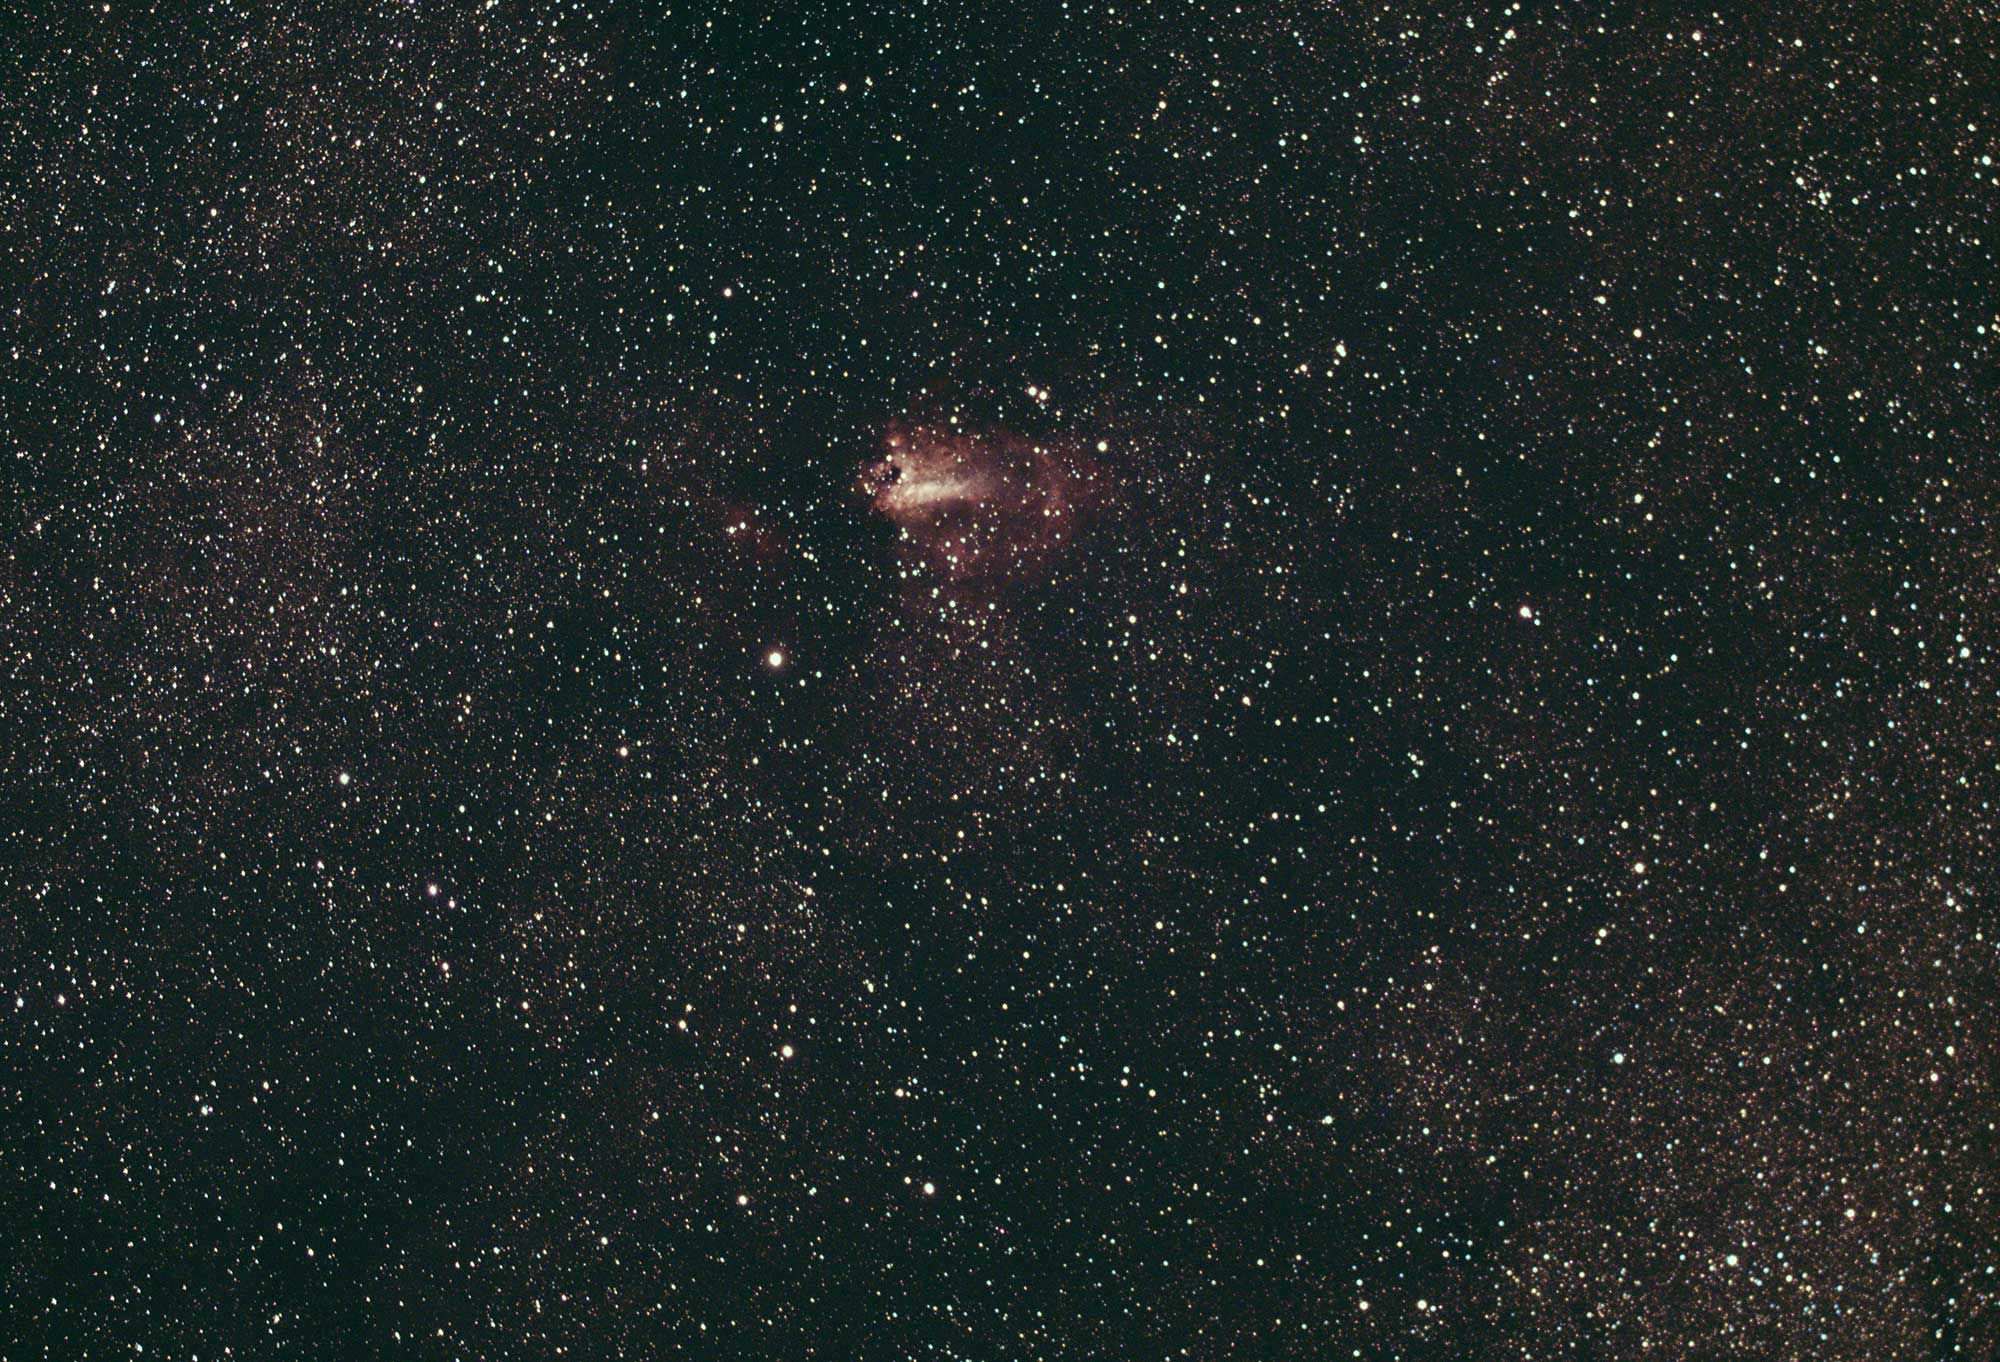 astrophotography of swan nebula with William Optics GT71 using asi 294 mcpro colour camera